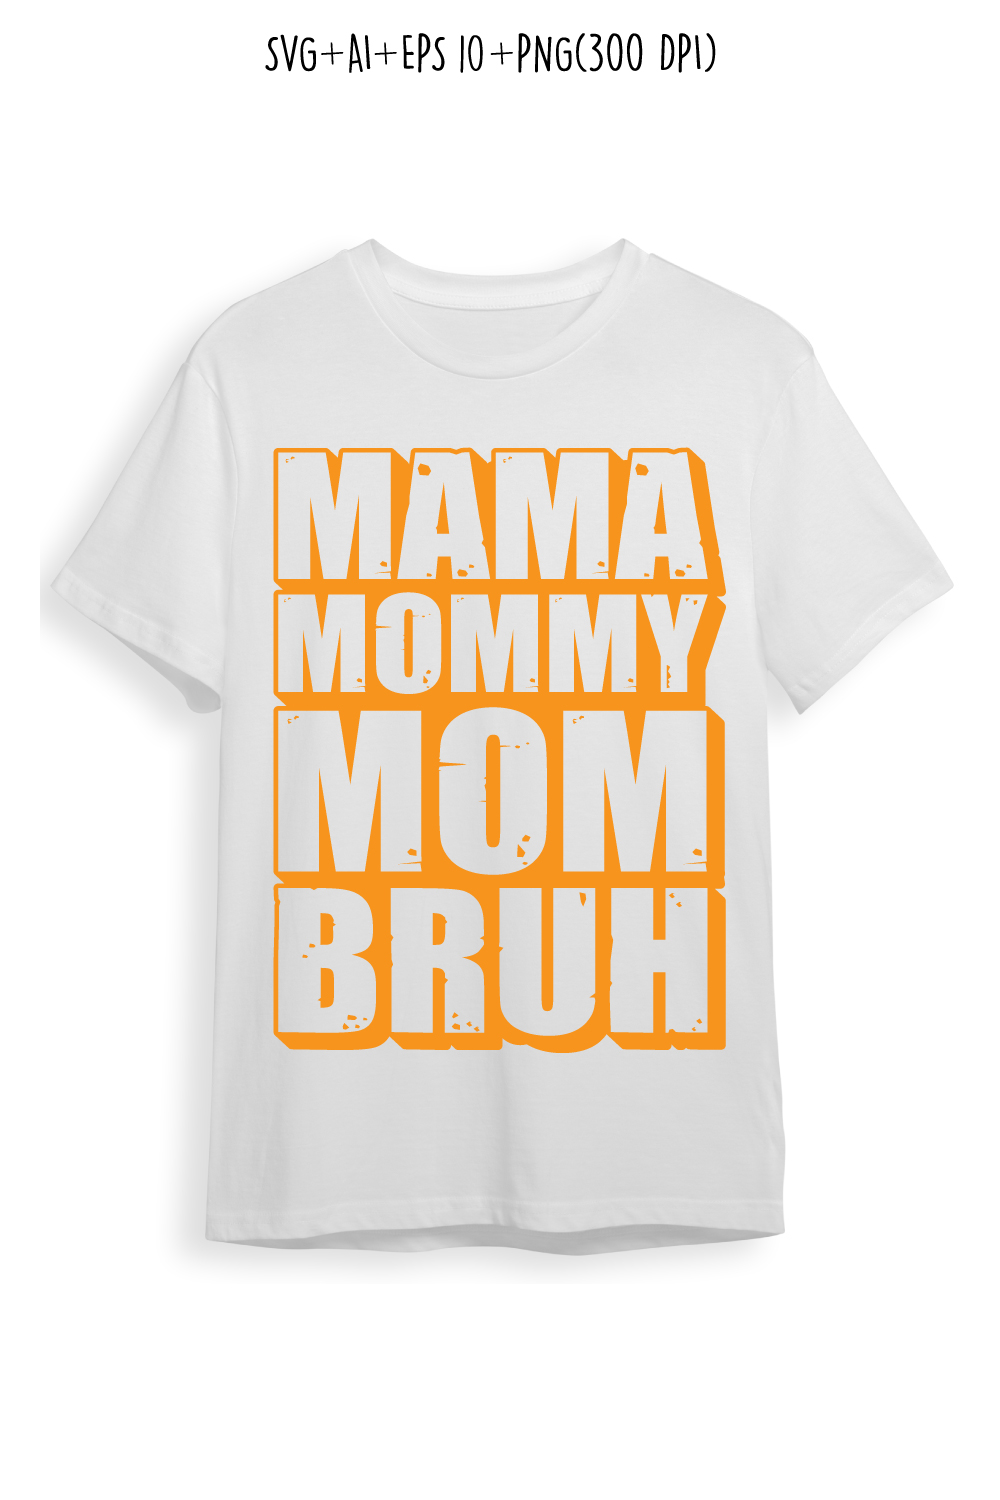 Mama Mommy Mom Bruh mothers day t-shirt design, mom quotes, mothers day quotes for t-shirts, cards, frame artwork, phone cases, bags, mugs, stickers, tumblers, print, etc pinterest preview image.